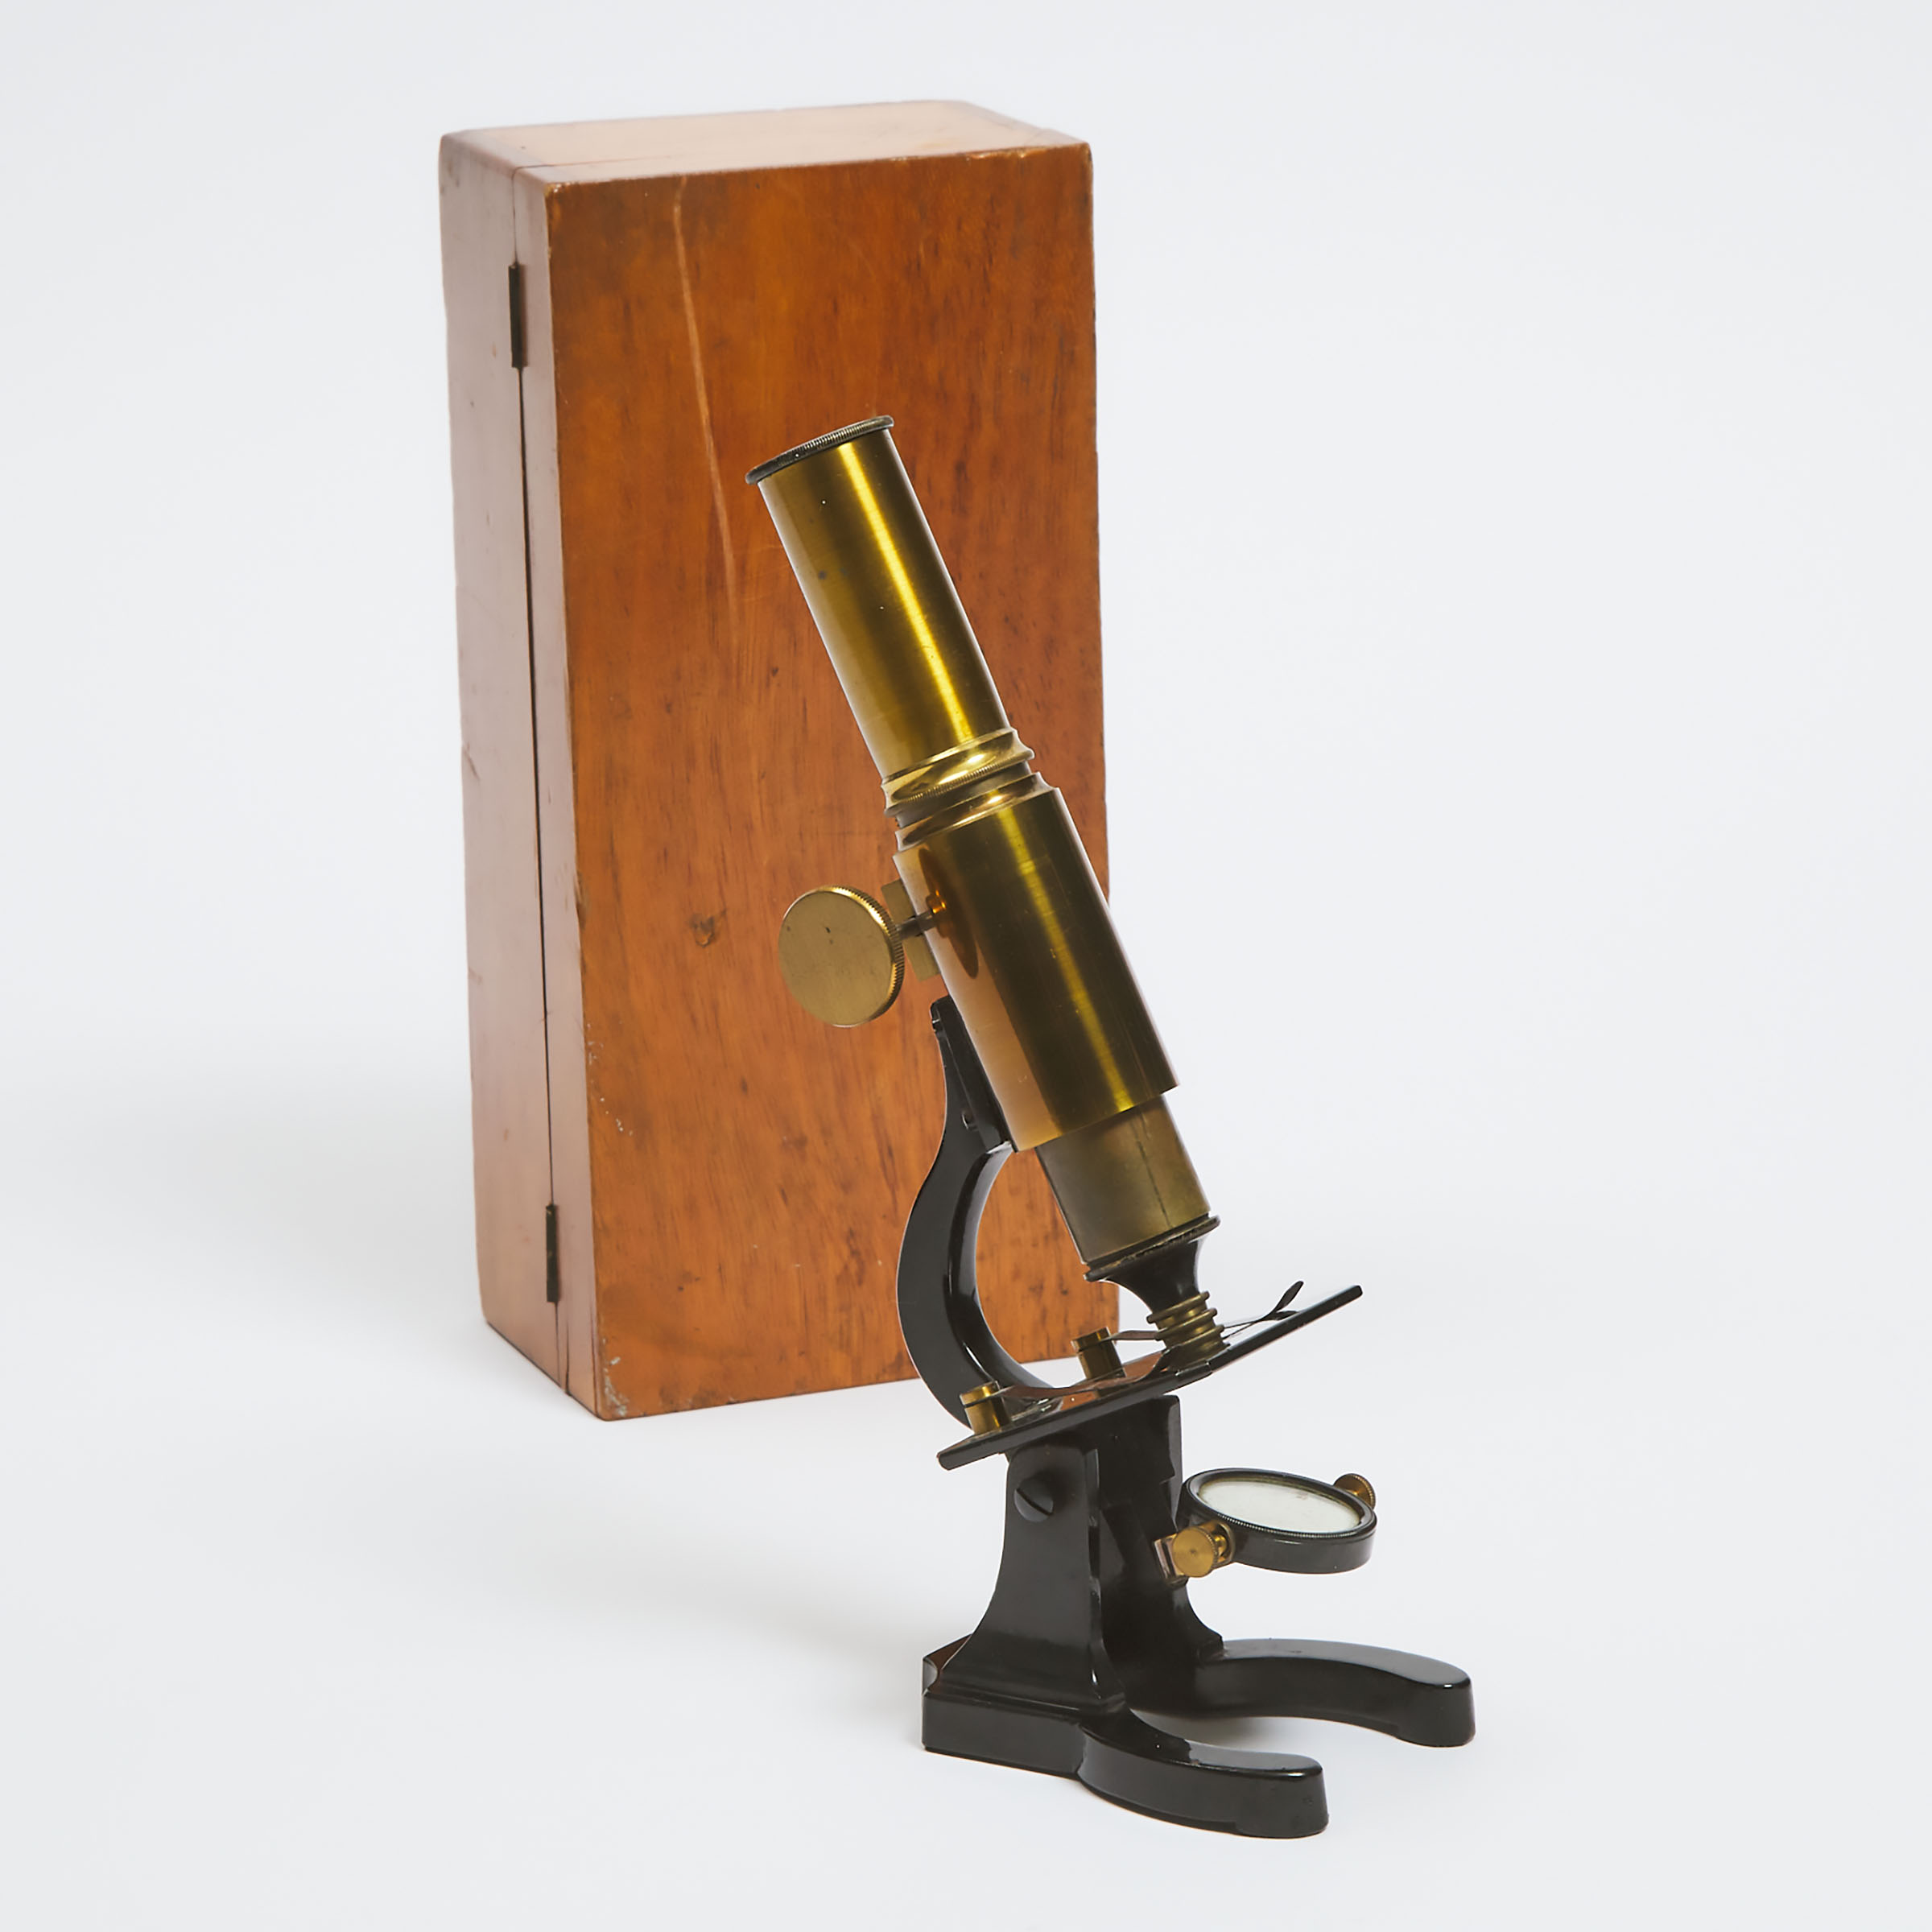 Small Lacquered and Black Enamelled Brass Compound Field Microscope, early 20th century